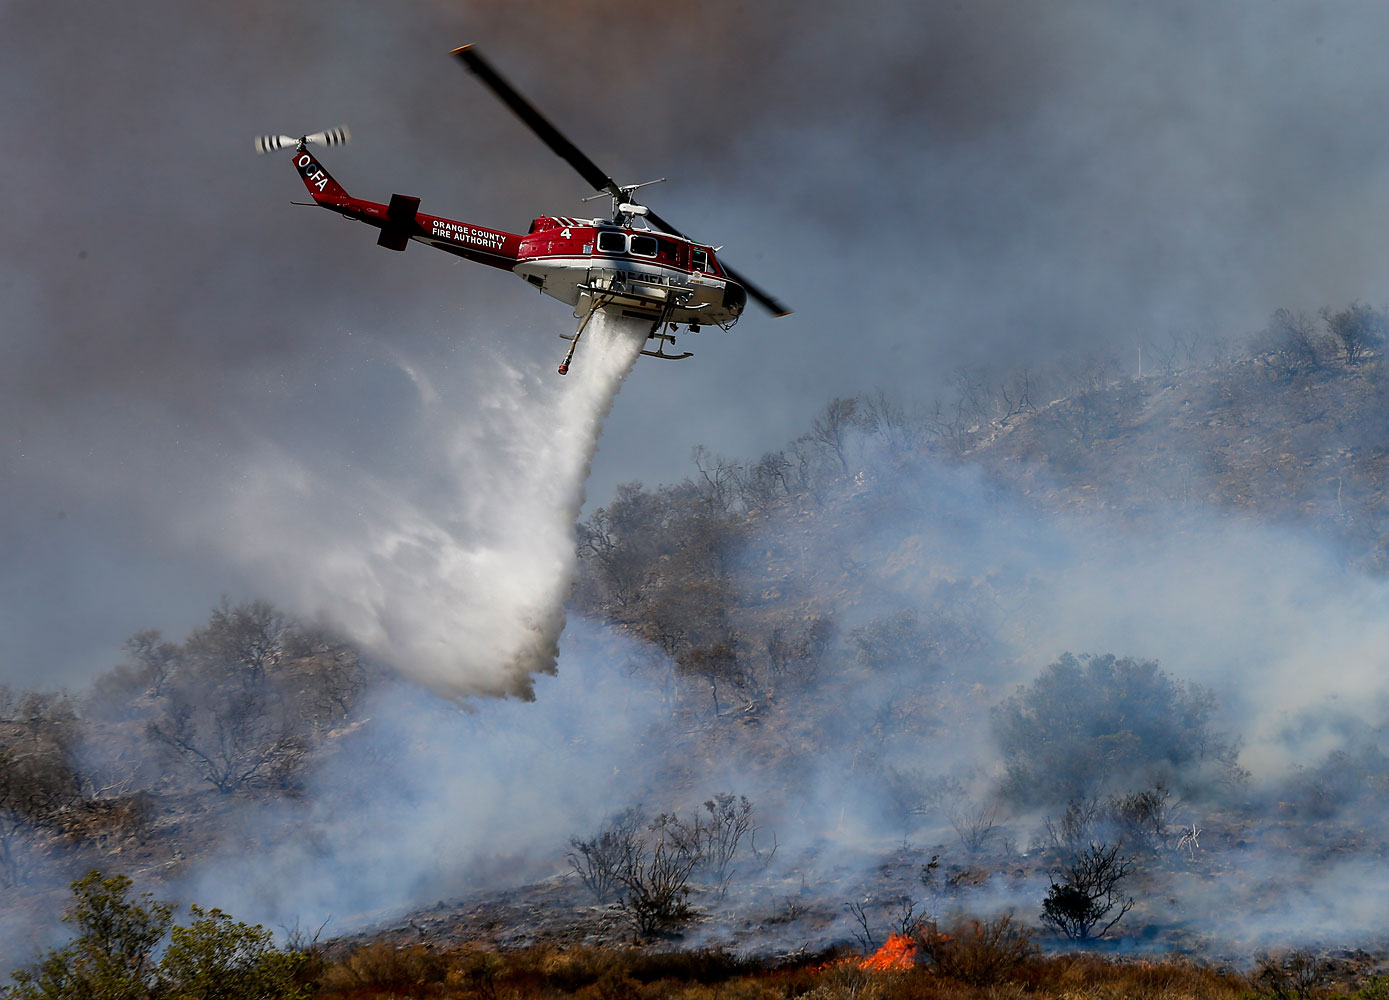 More than 280 firefighters are aided by water dropping helicopters and fixed-wing aircraft as they battle a 1,300-acre fire in Silverado Canyon, Calif., on Sept. 12, 2014. (Mark Boster—Los Angeles Times/AP)